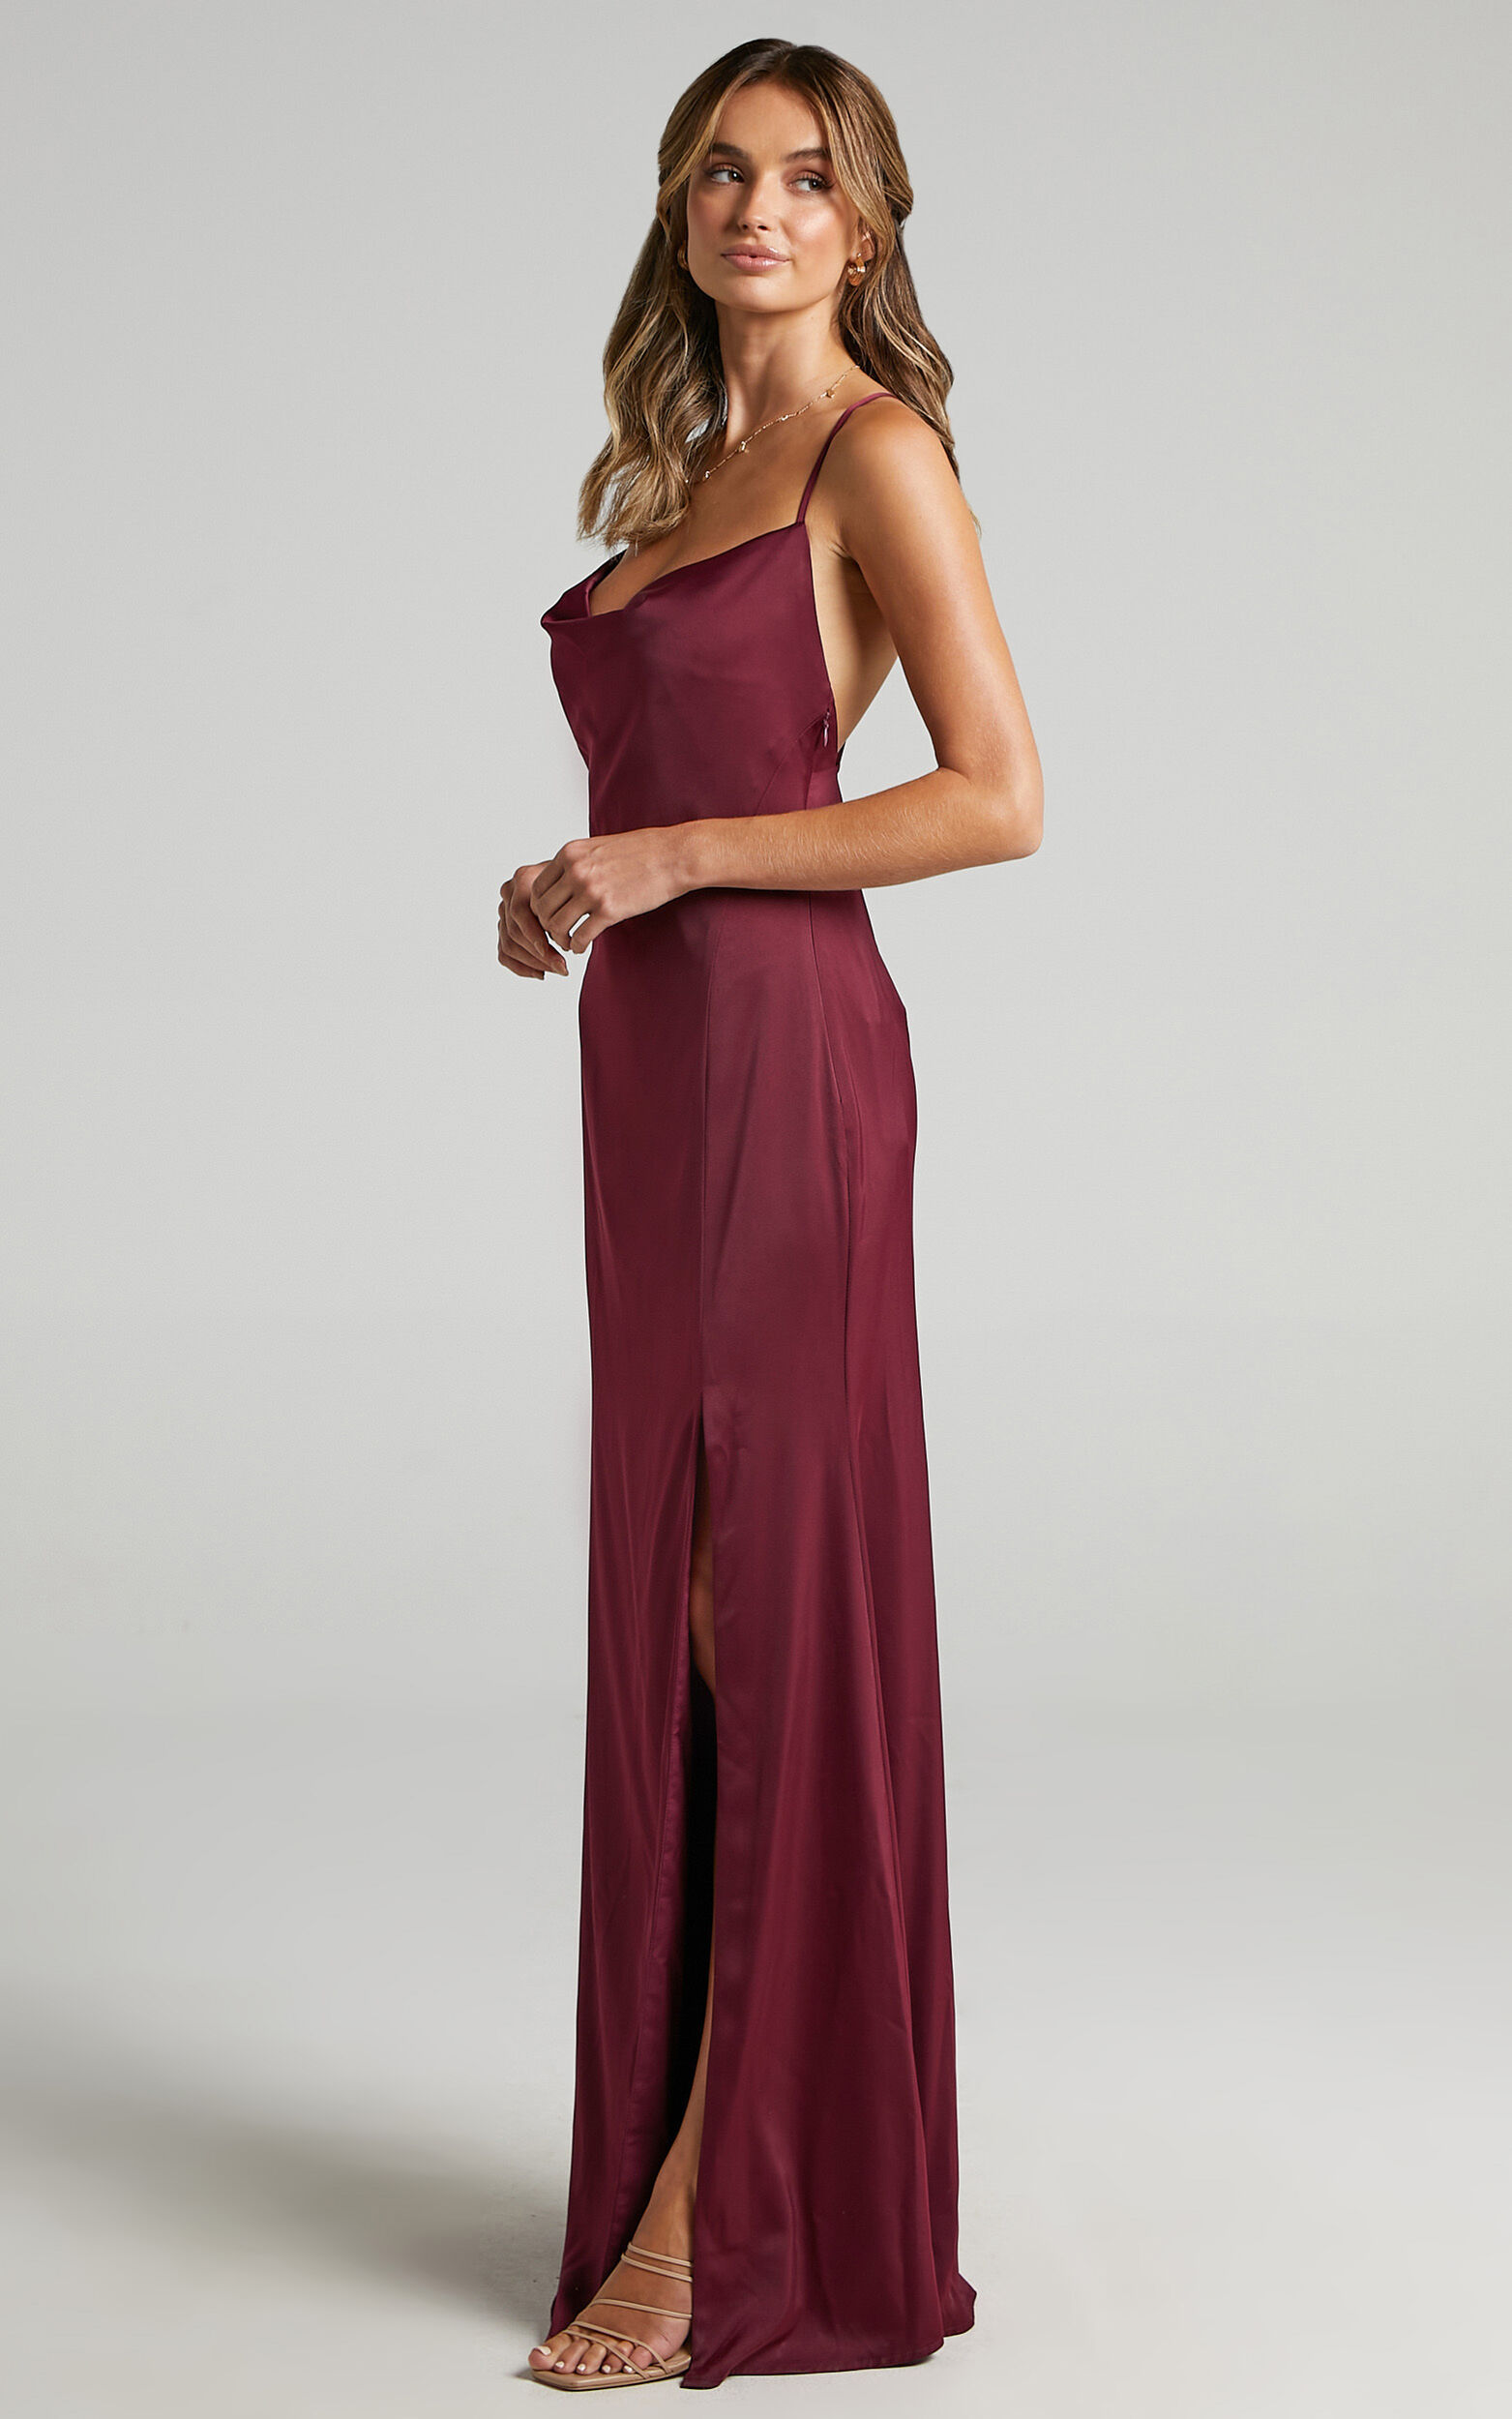 A Final Toast Midi Dress - Cowl Neck Thigh Split Dress in Mulberry ...